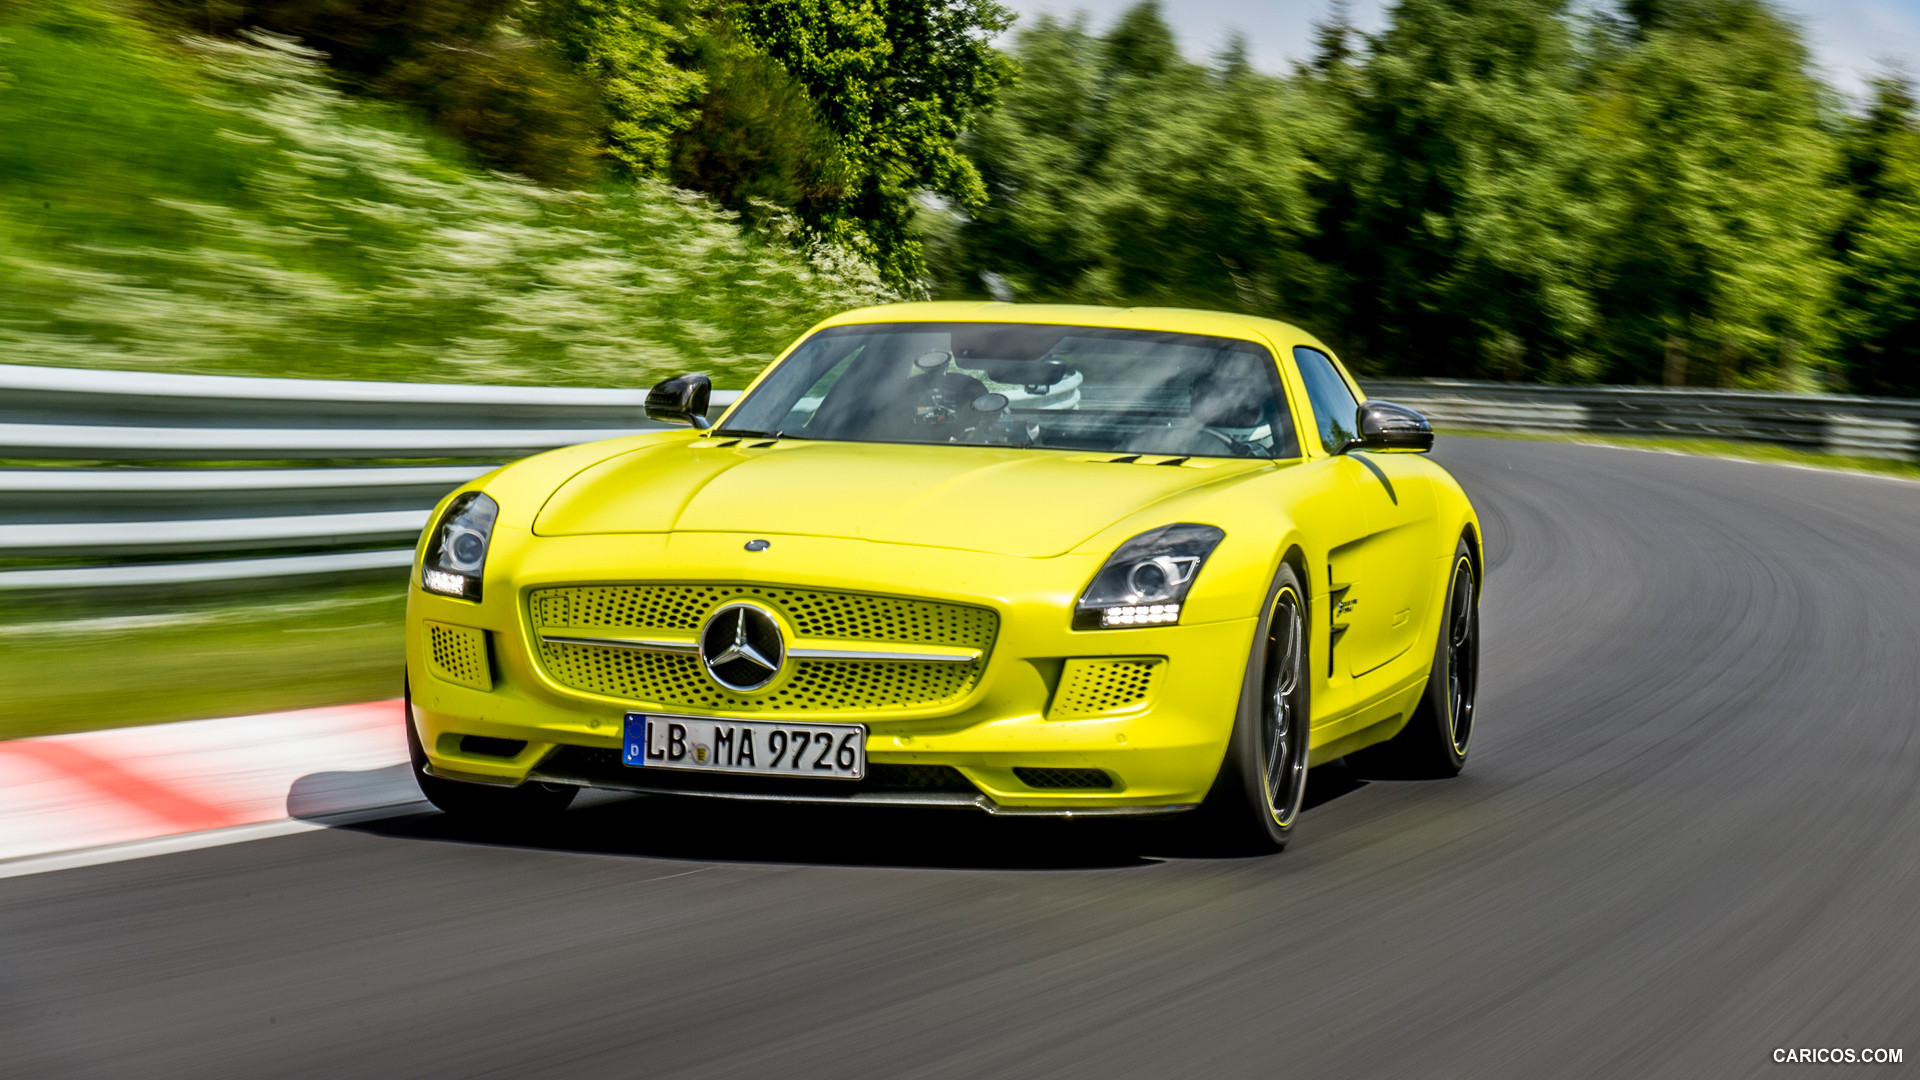 2014 Mercedes-Benz SLS AMG Coupe Electric Drive, Yellow at Nürburgring   - Front, #41 of 47